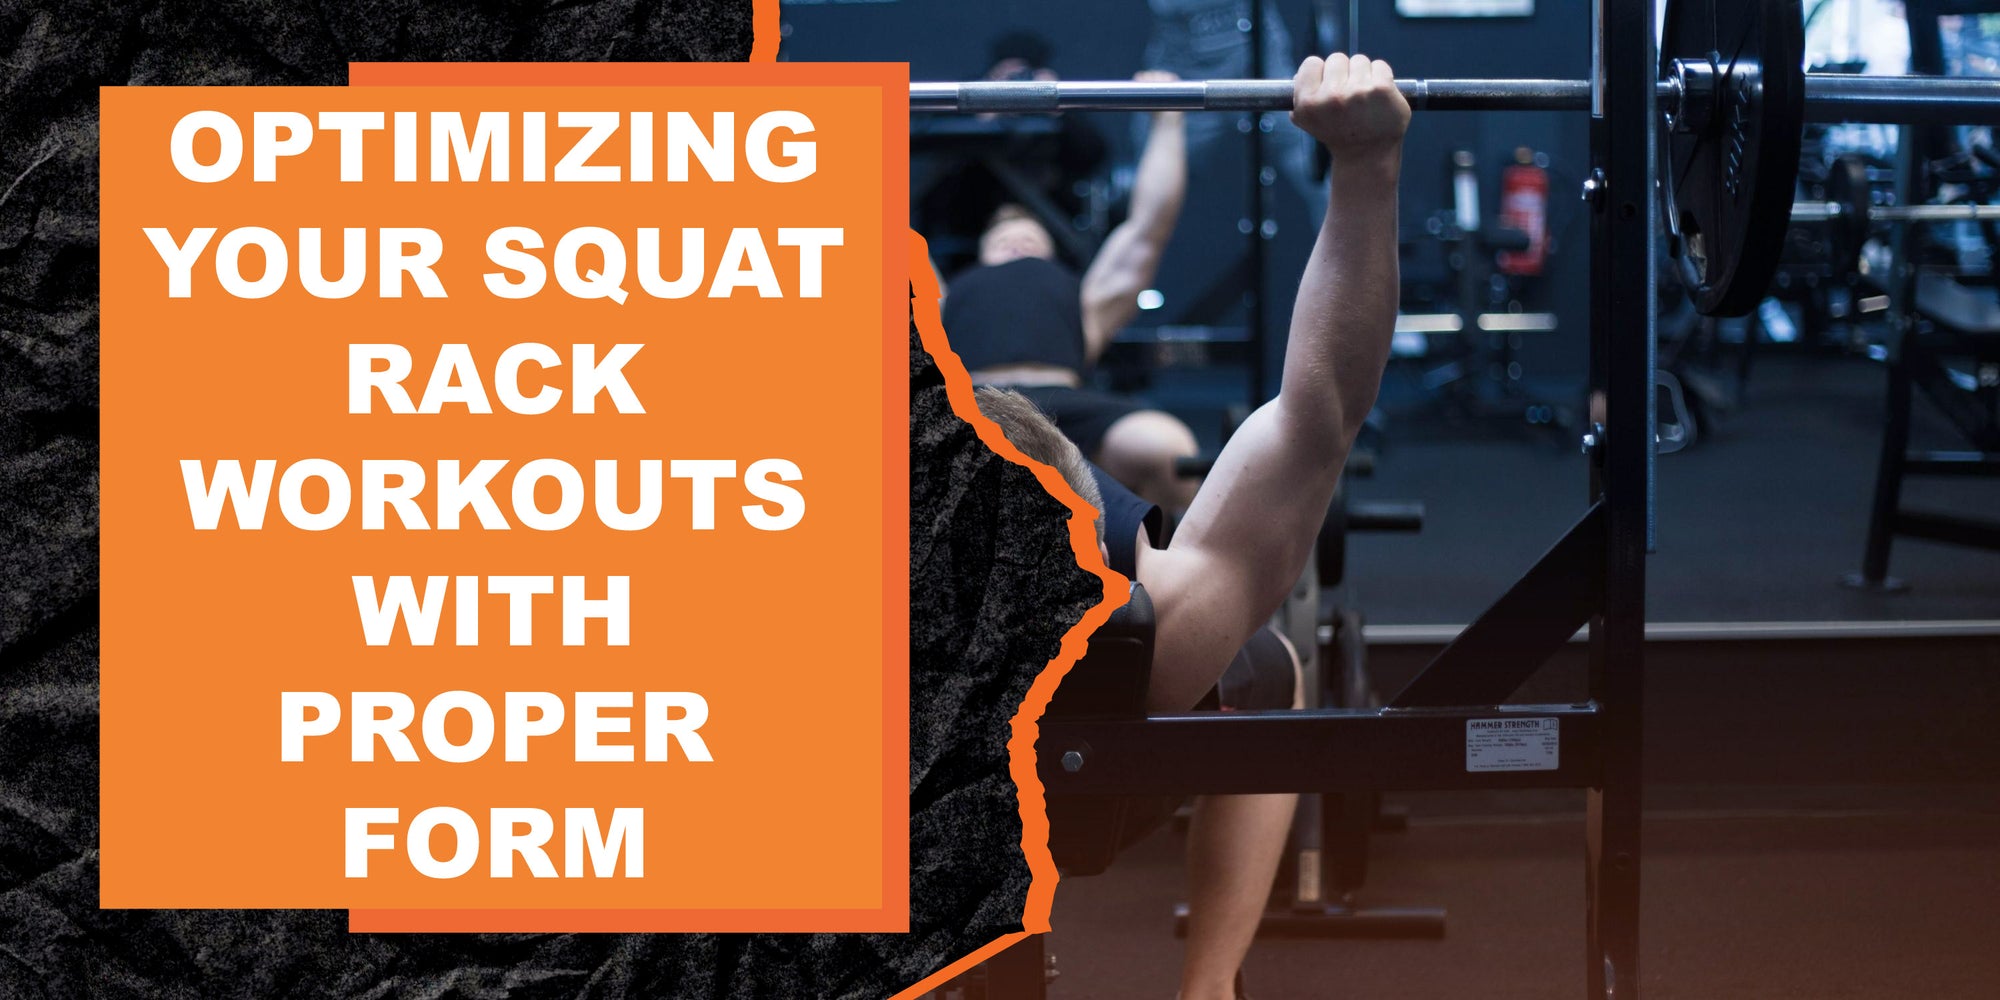 Optimizing Your Squat Rack Workouts with Proper Form